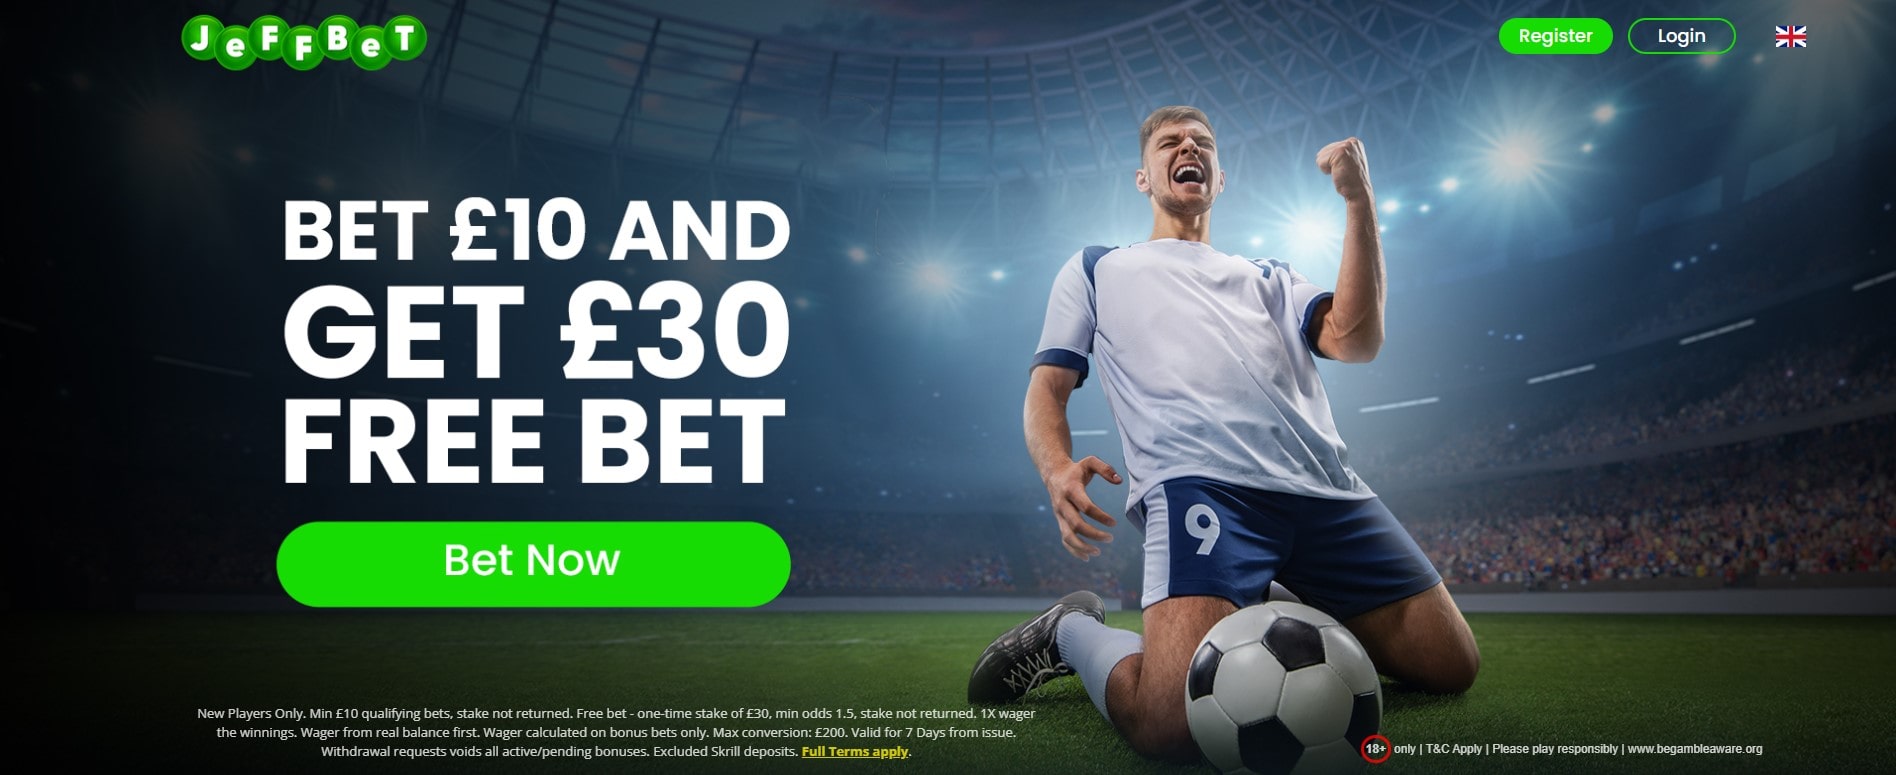 jeffbet betting sign up offer